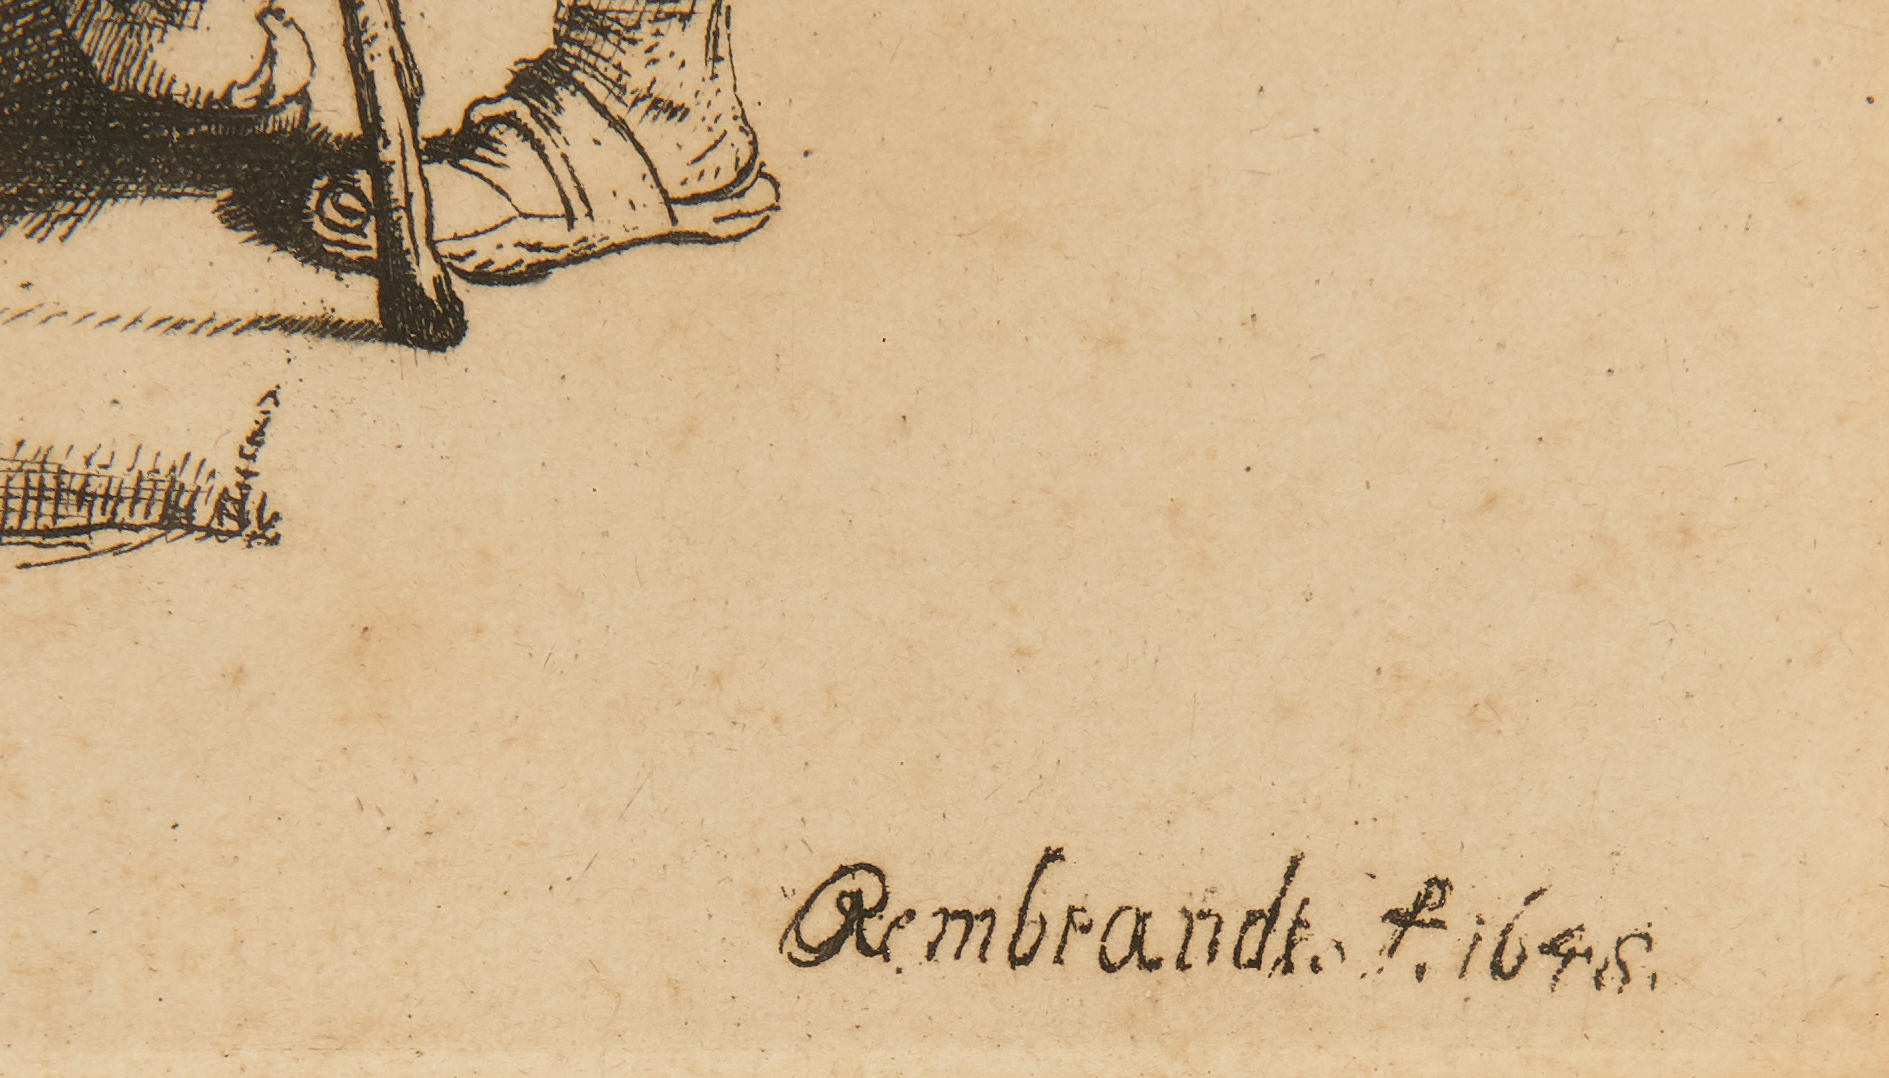 Lot 107: 3 Etchings After Rembrandt and Goya